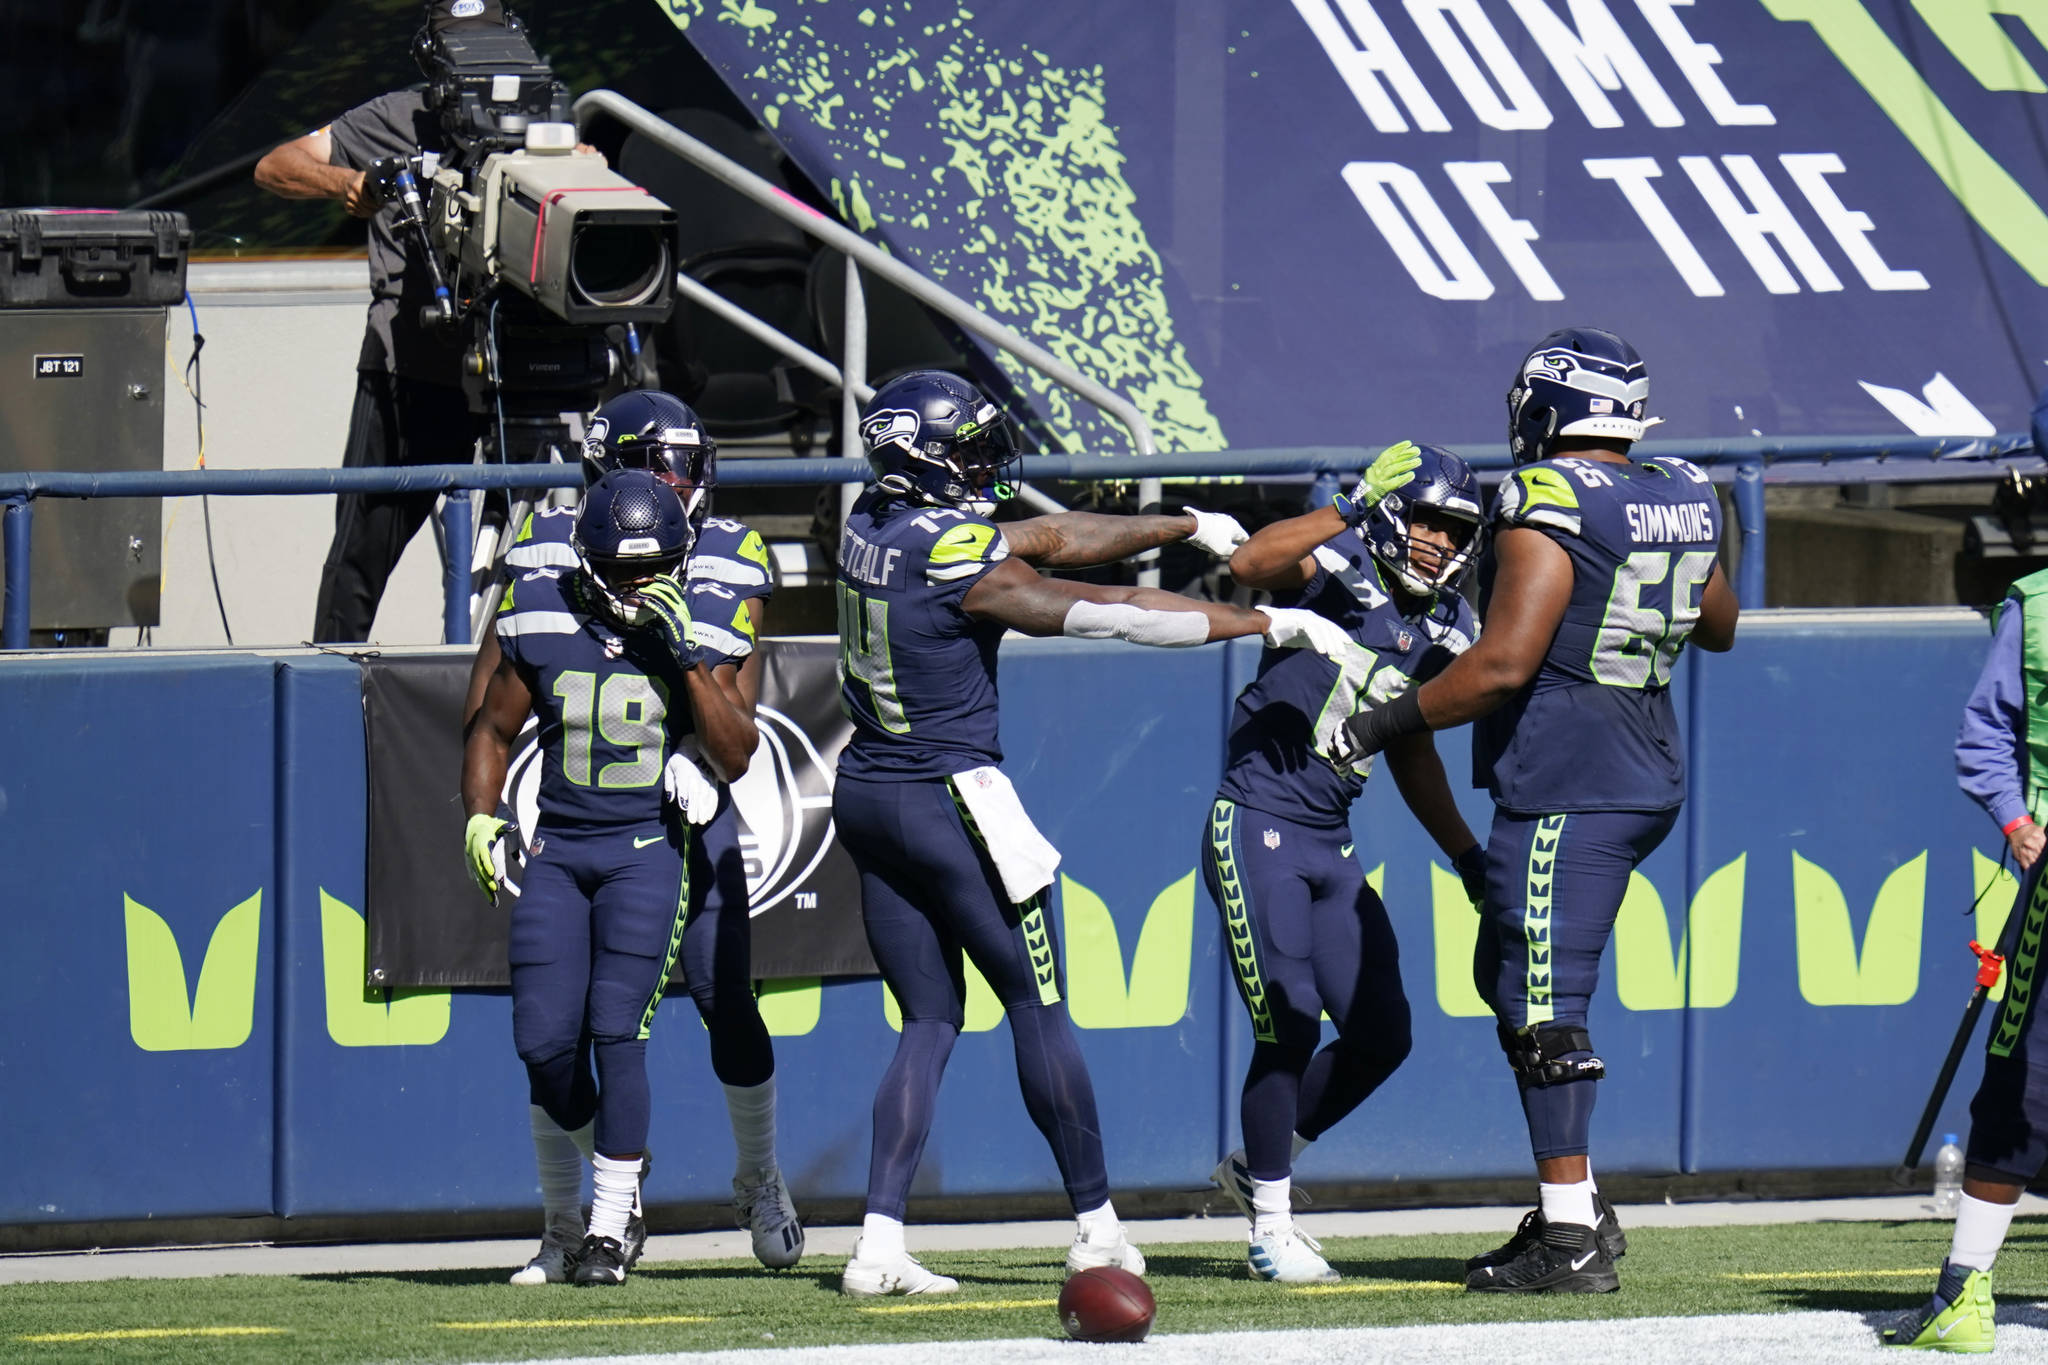 Seattle Seahawks receiver Tyler Lockett, second from right, celebrates with teammates DK Metcalf, center, and Jordan Simmons, right, after Lockett scored a touchdown against the Dallas Cowboys during the first half of Seattle’s 38-31 victory Sunday at CenturyLink Field. (AP Photo/Elaine Thompson)